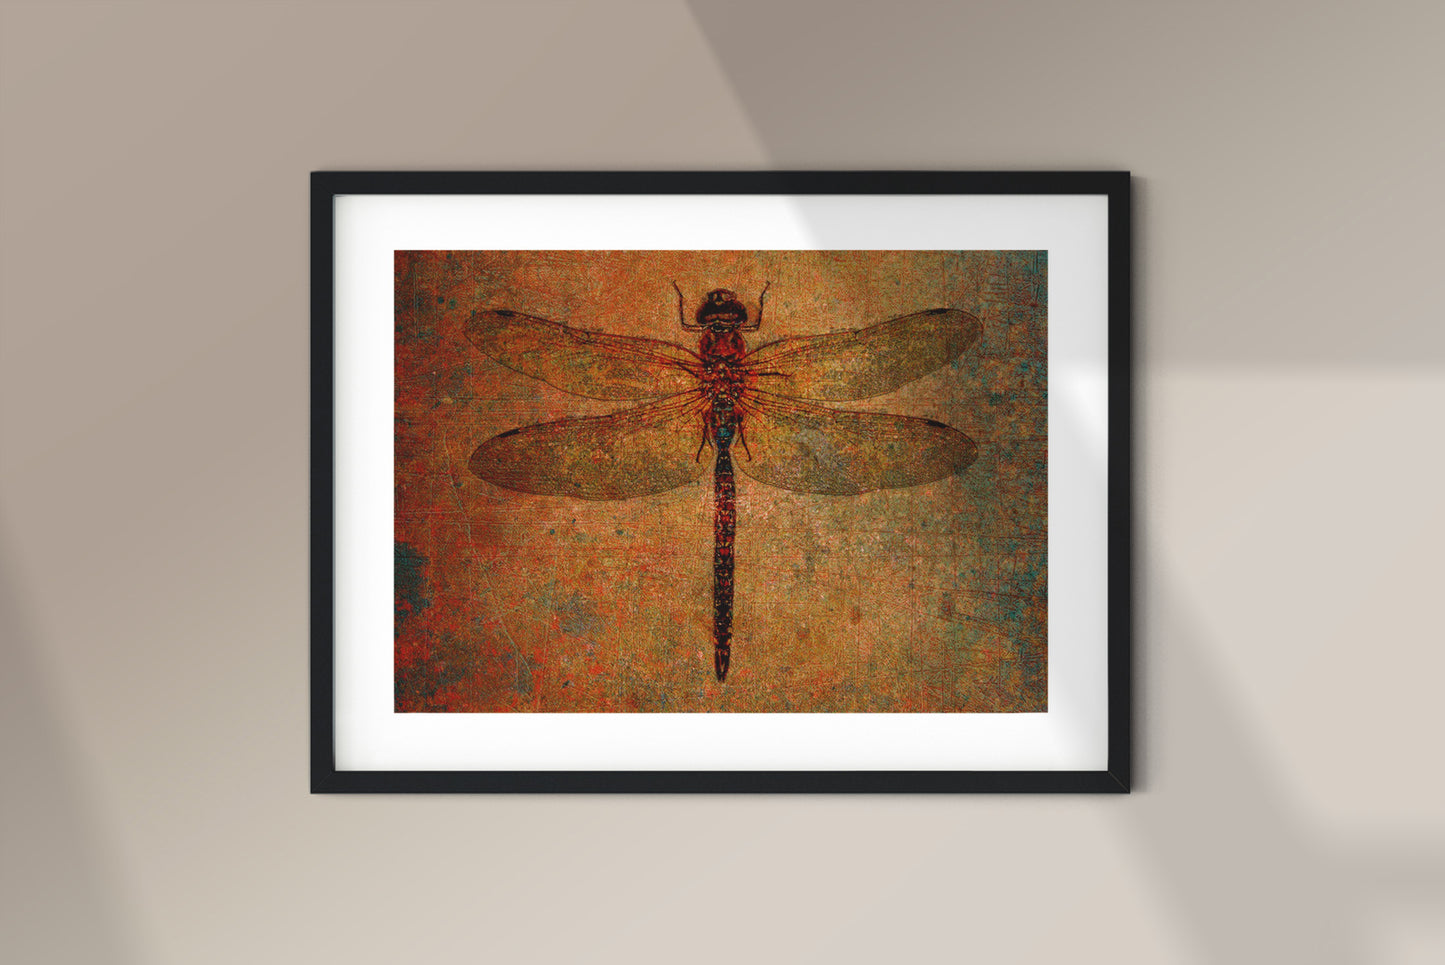 Dragonfly on Distressed Background  Rectangular Museum-quality Print on Archival paper framed and hung